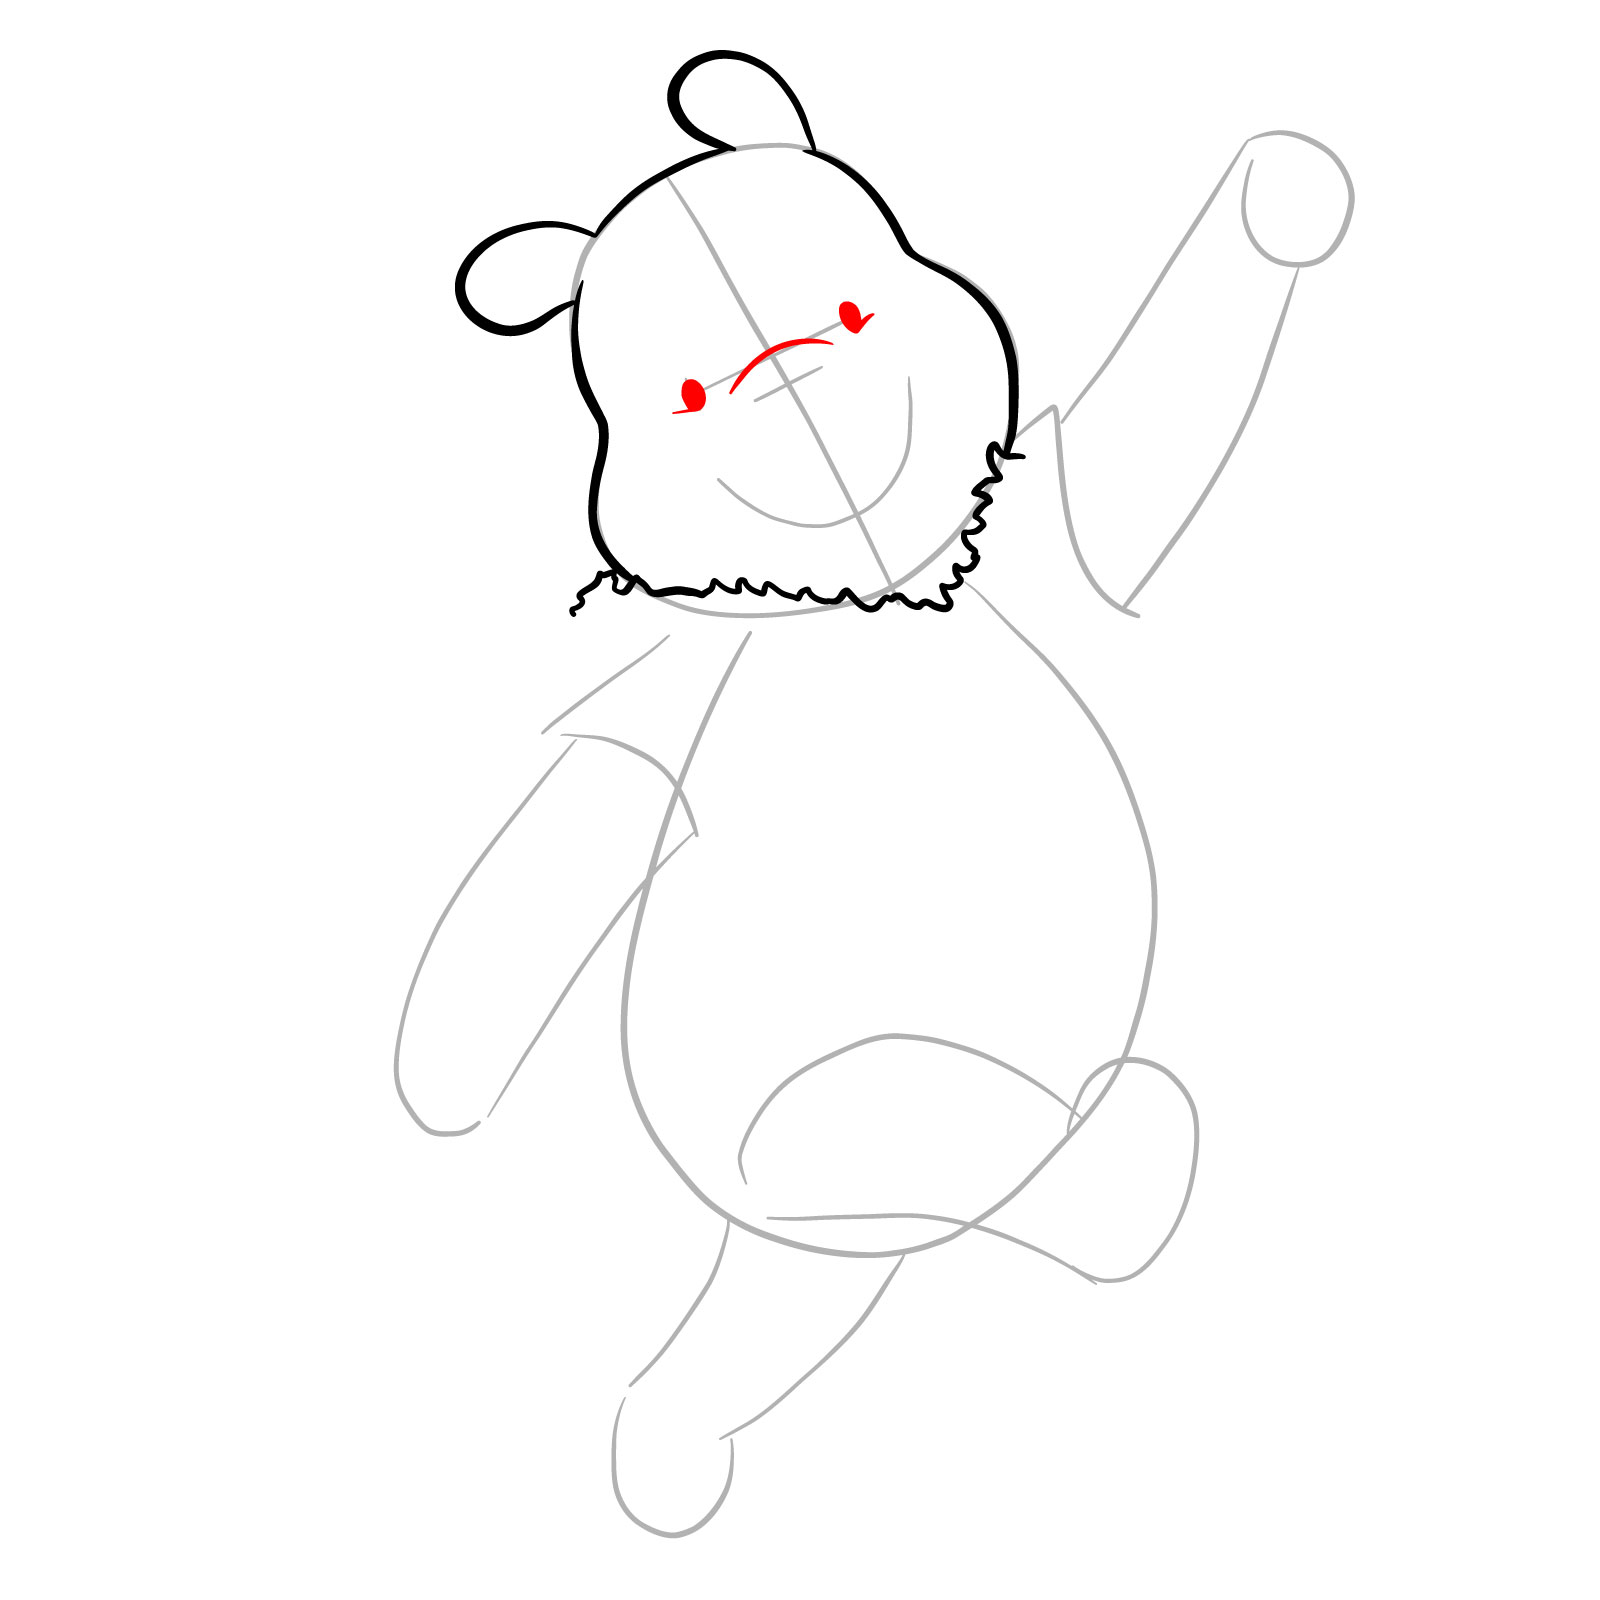 How to draw Winnie-the-Pooh Christmas style - step 07